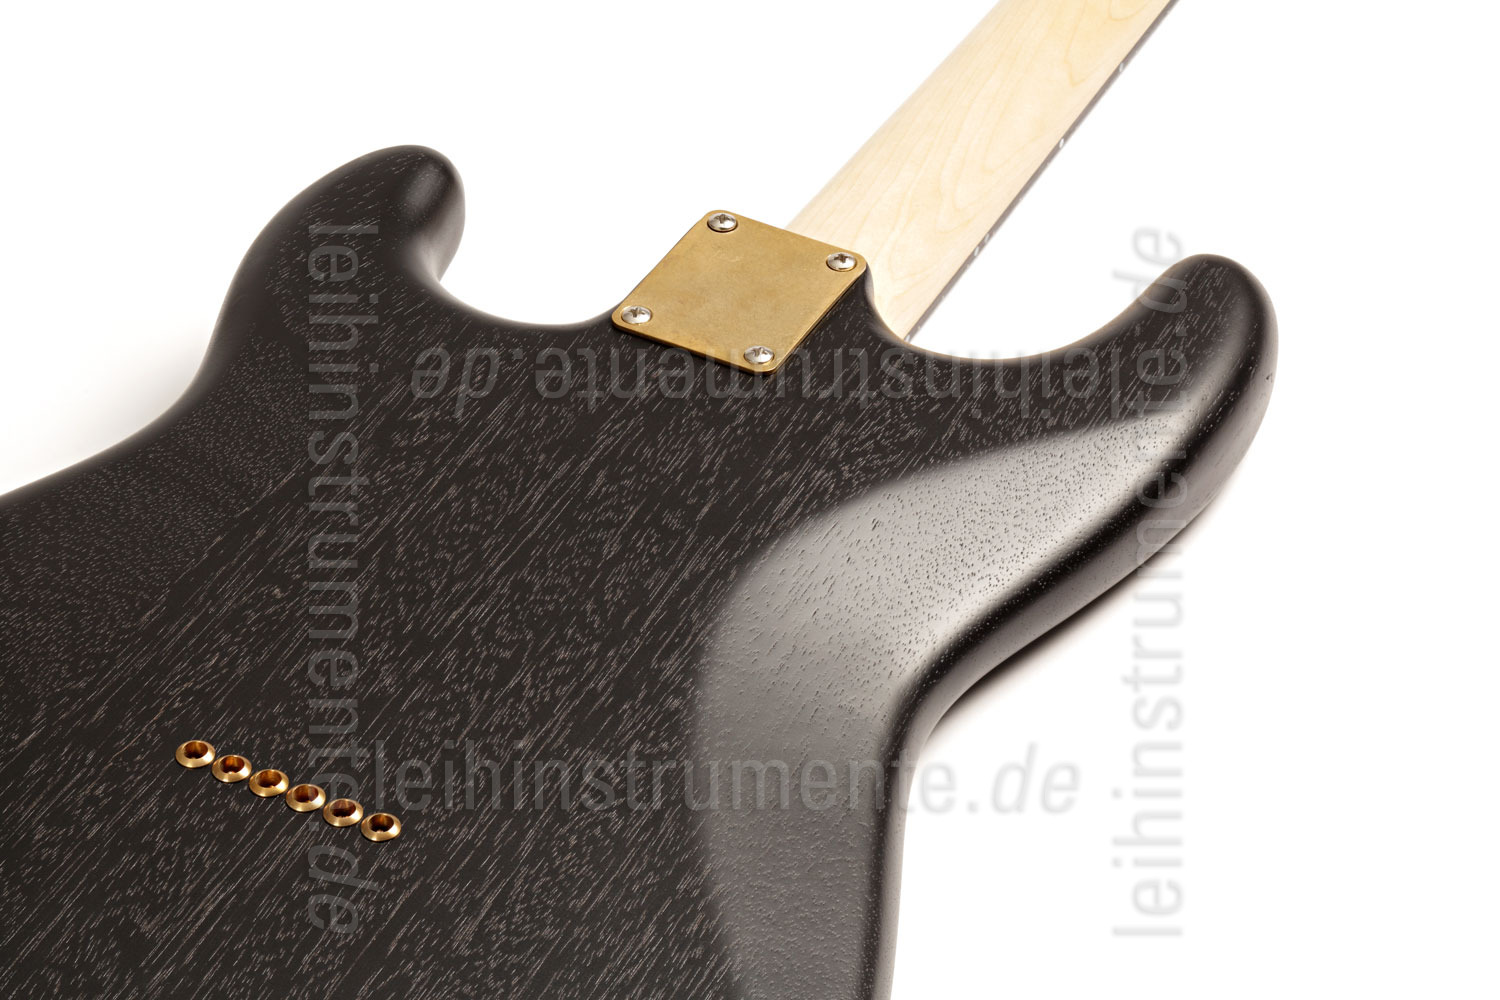 to article description / price Electric Guitar BERSTECHER Deluxe Vintage (Hot B) - Black / Floral Brown + hard case - made in Germany